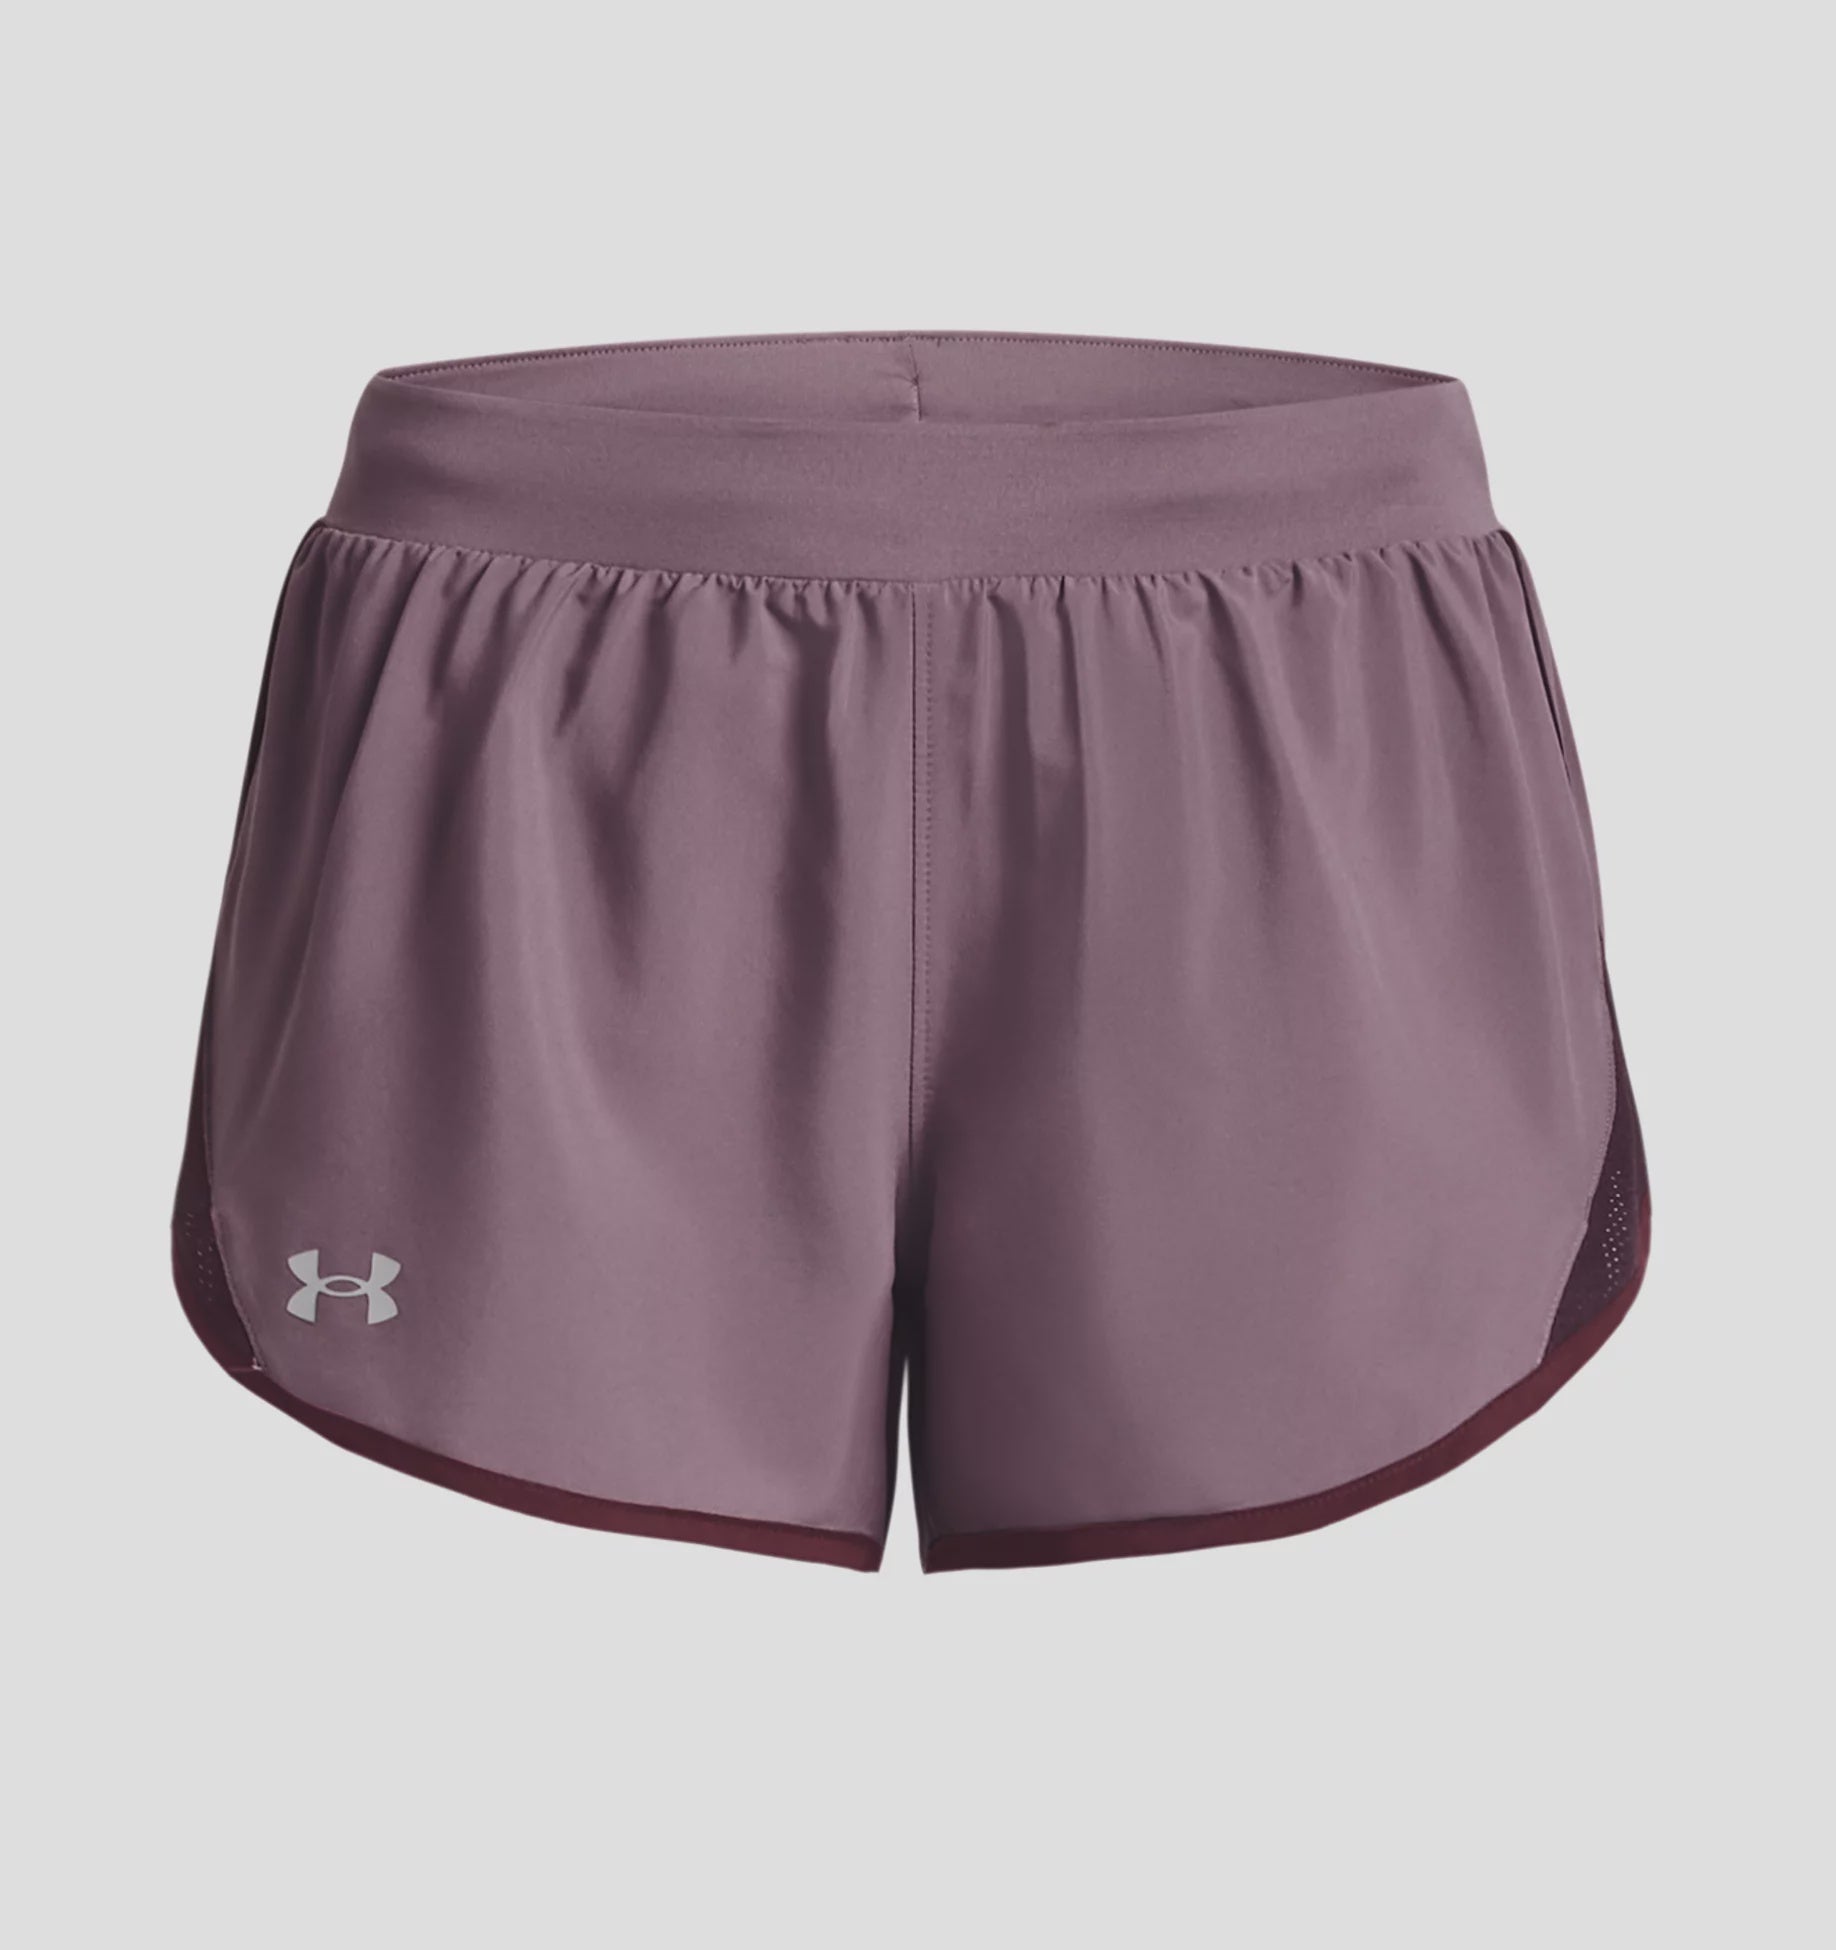 Under Armour Fly By 2.0 Women's Shorts - Purple/Maroon